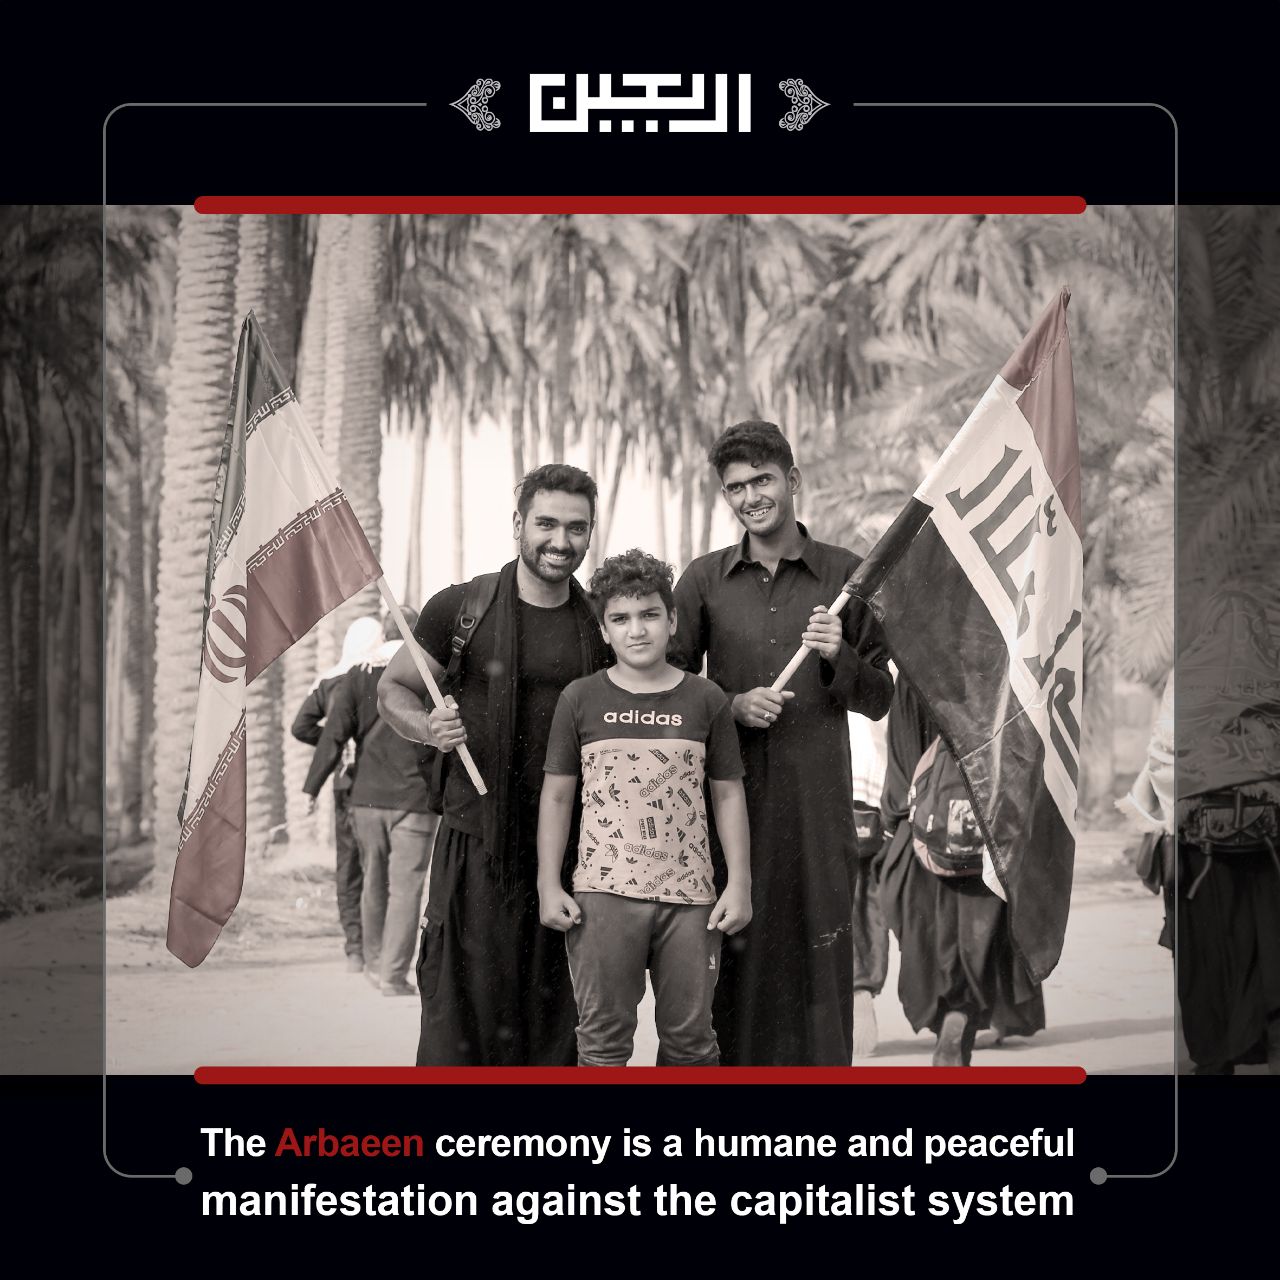 The Arbaeen ceremony is a humane and peaceful manifestation against the capitalist system